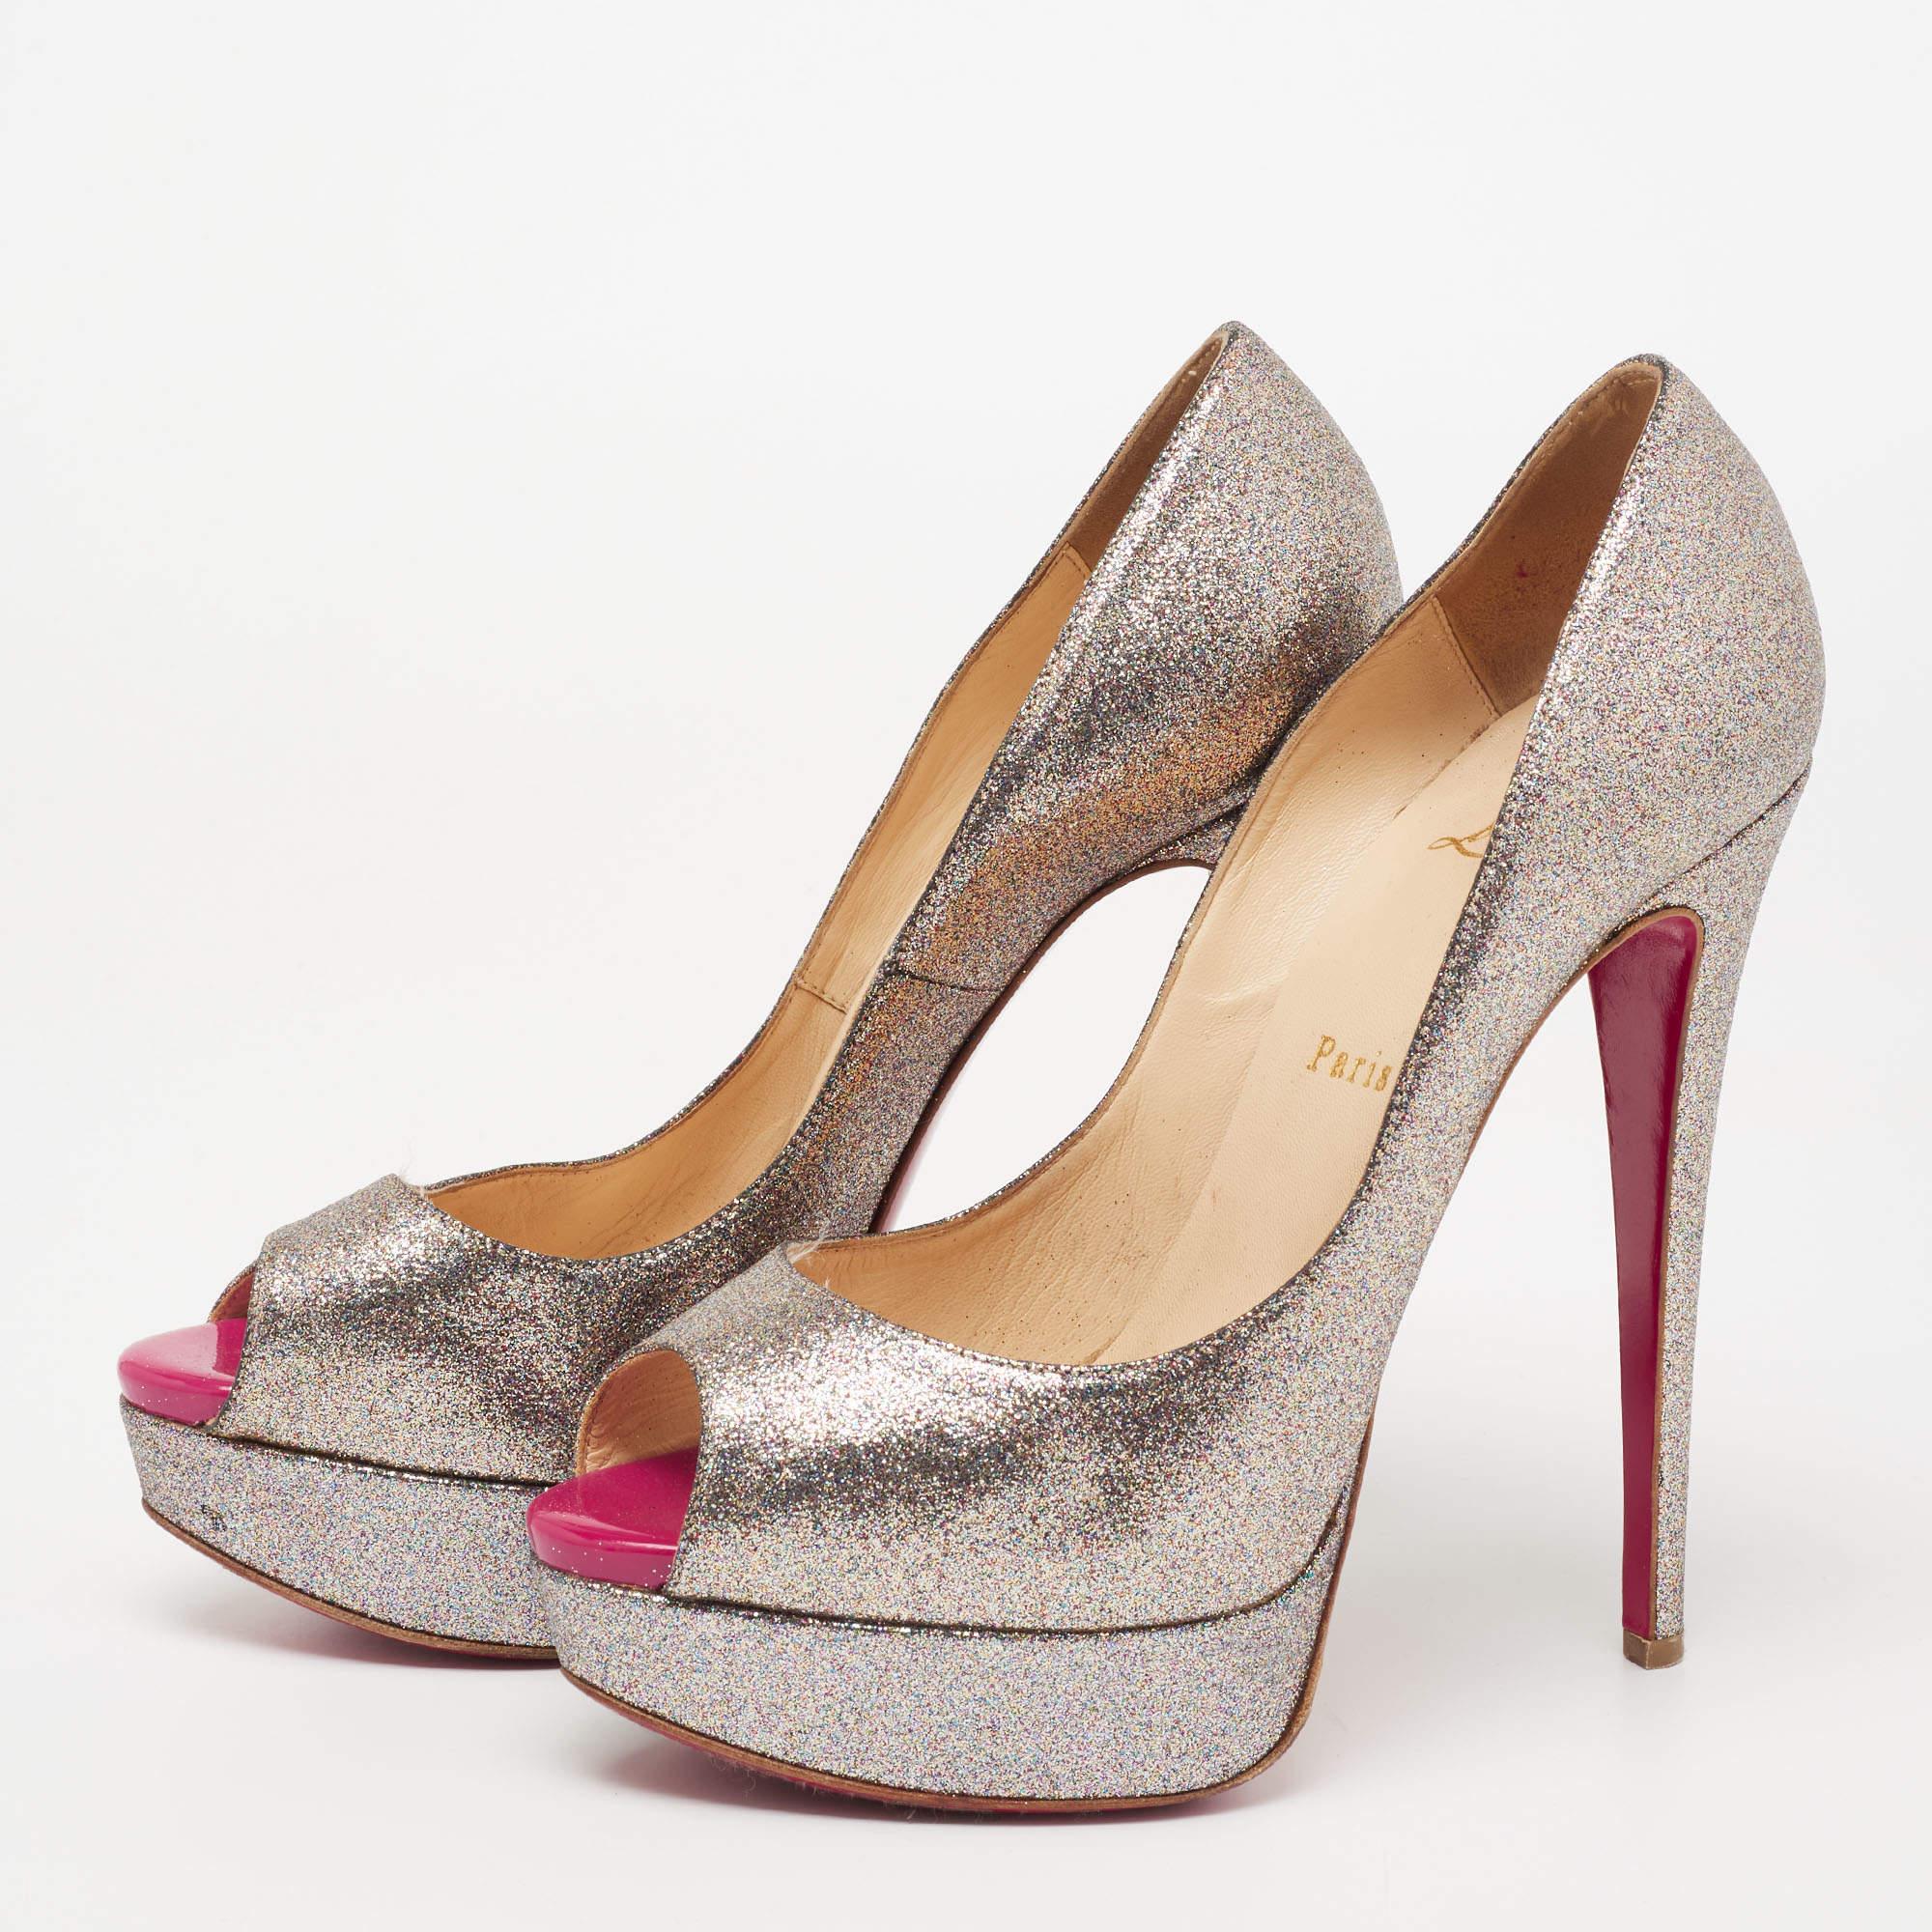 Stand out from the crowd with this gorgeous pair of Louboutins that exude high fashion with class. Crafted from glitter, this is a creation from their Lady Peep collection. It features a classic metallic shade with peep toes and a glossy exterior.